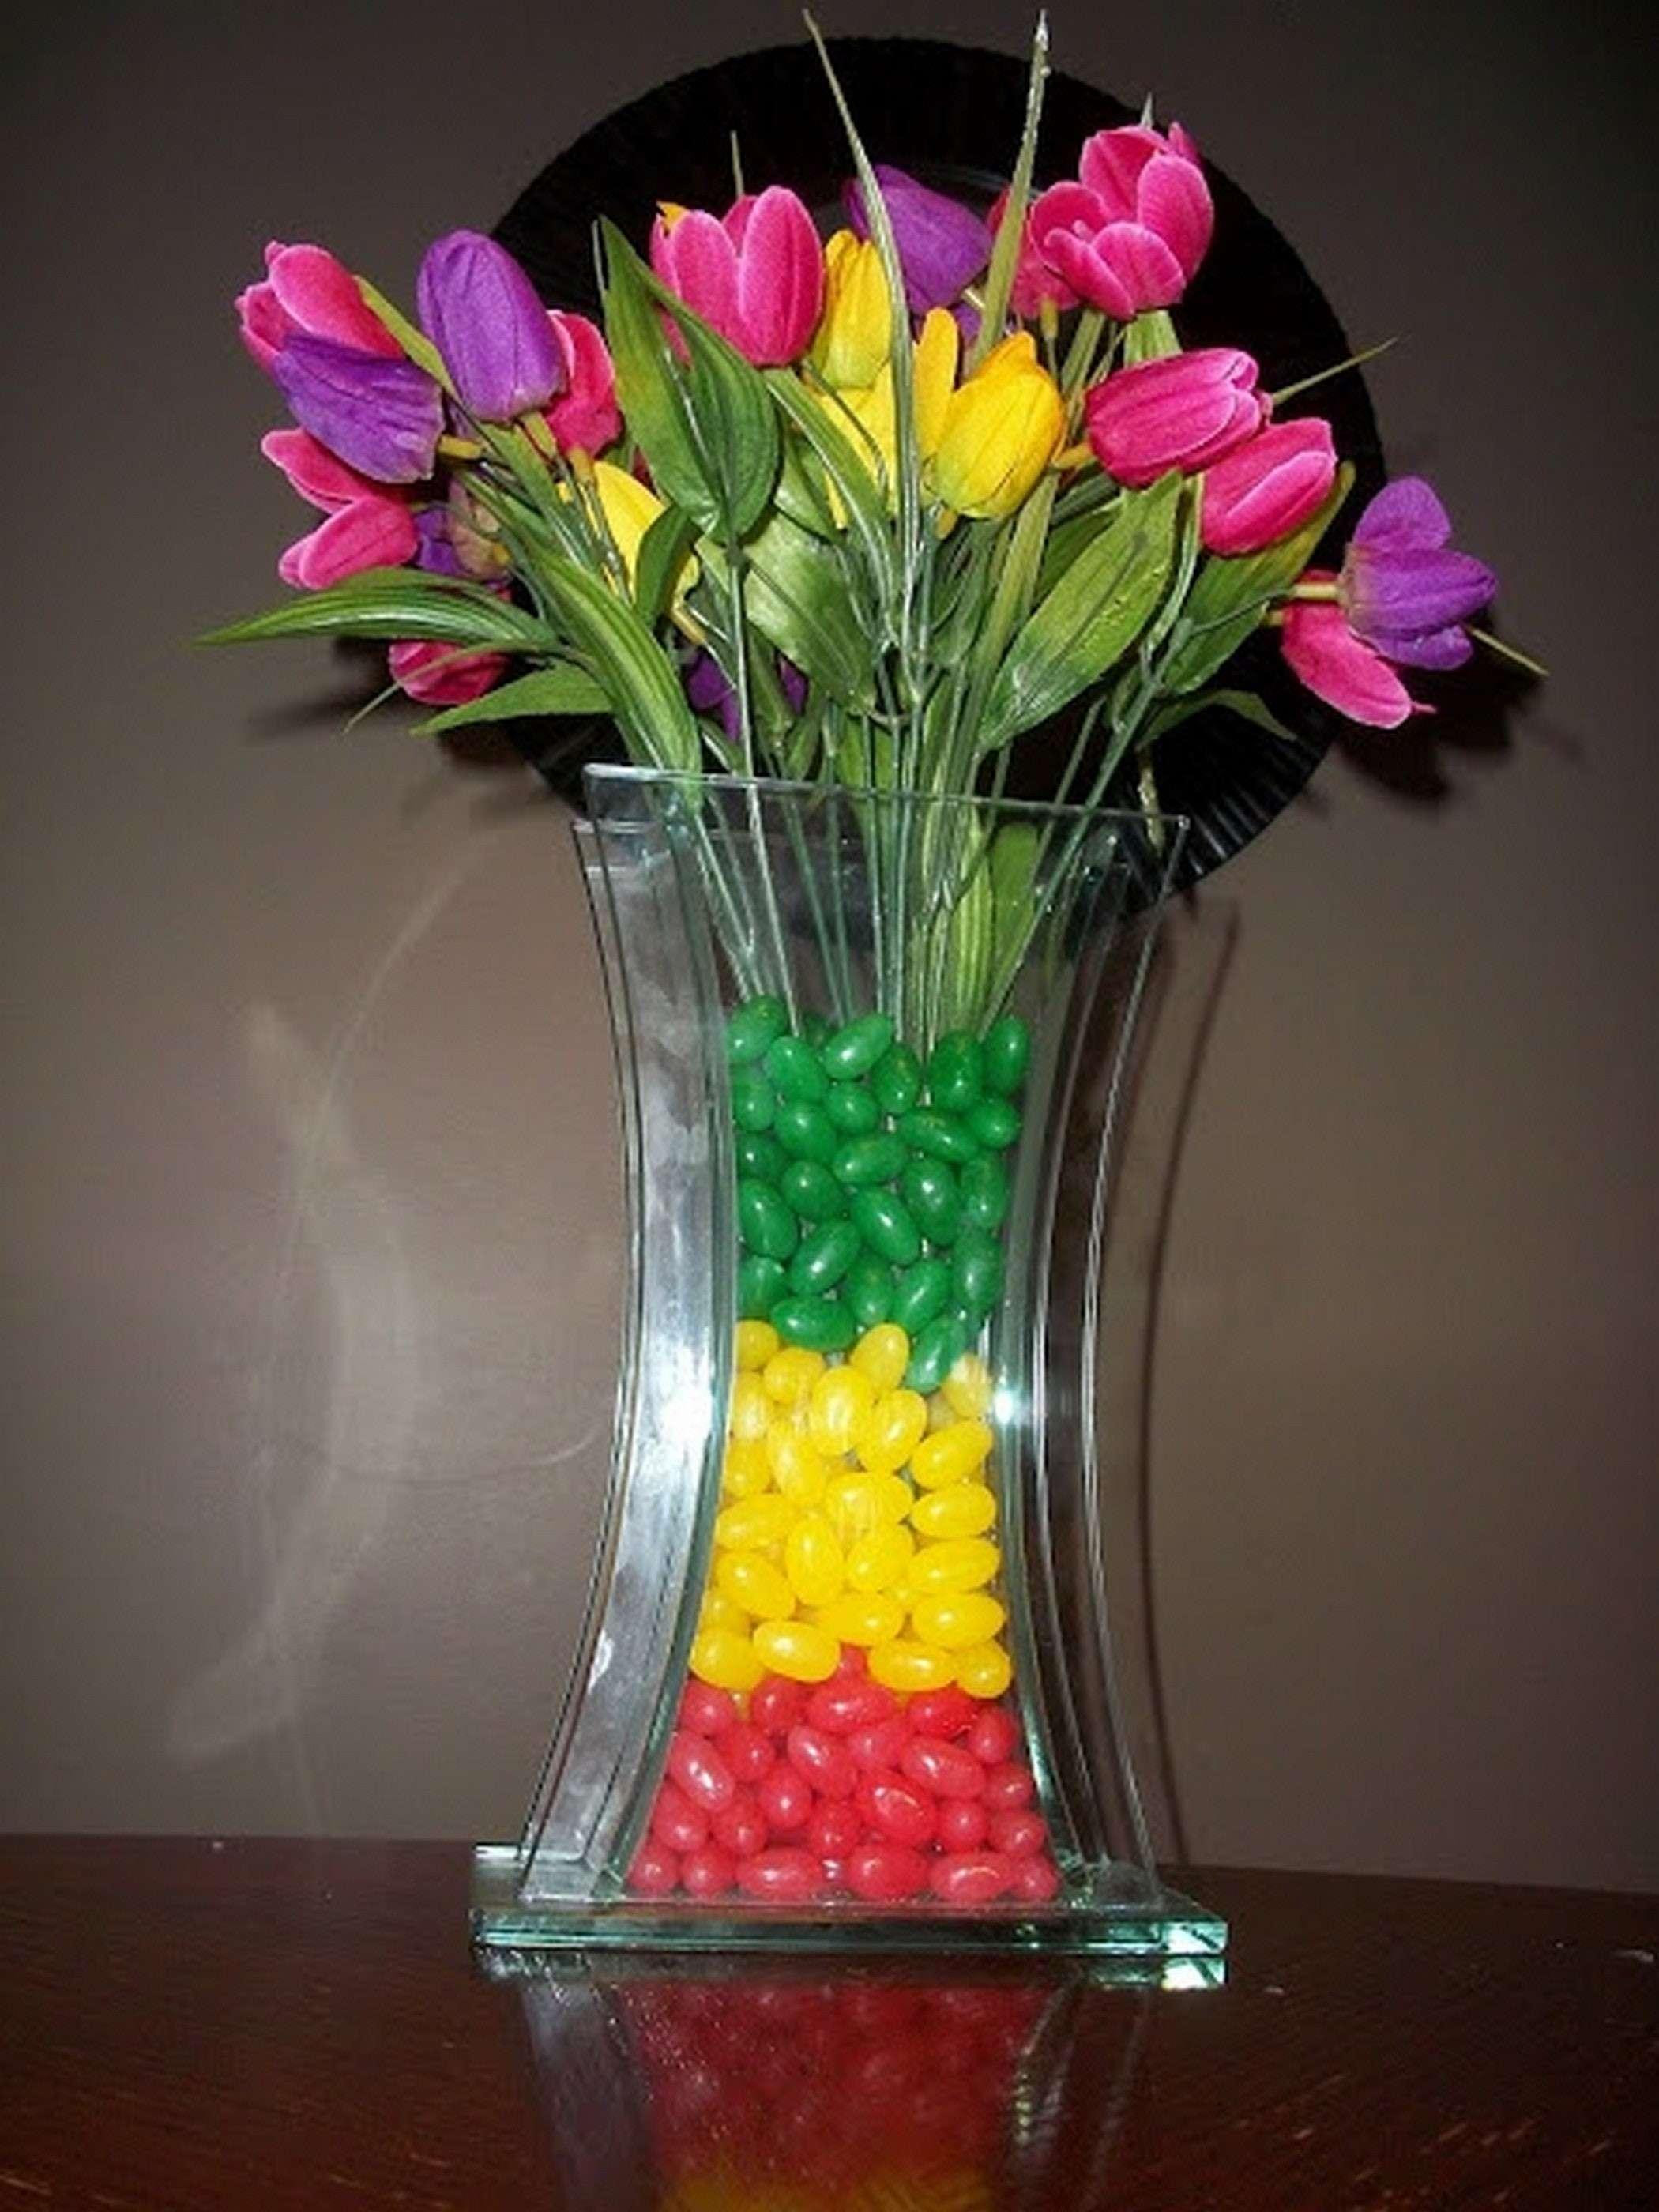 floor vase and flowers of easy diy ideas beautiful 15 cheap and easy diy vase filler ideas 3h intended for easy diy ideas beautiful 15 cheap and easy diy vase filler ideas 3h vases flower i